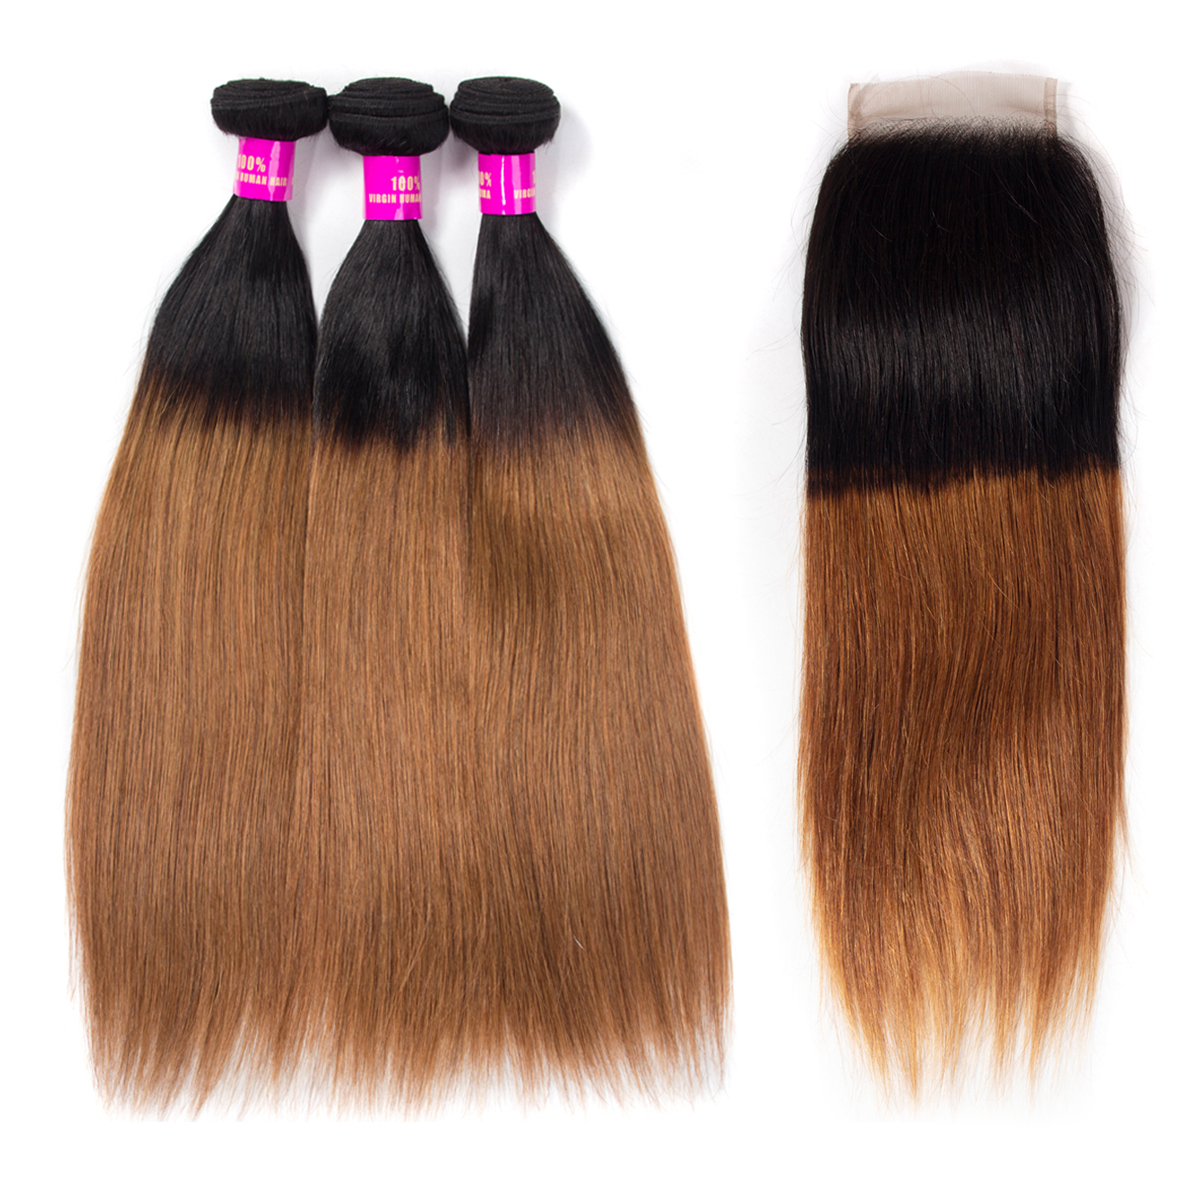 Brazilian Ombre 1B/30 Straight Hair Bundles With Lace Closure Virgin Hair Bundles With Closure